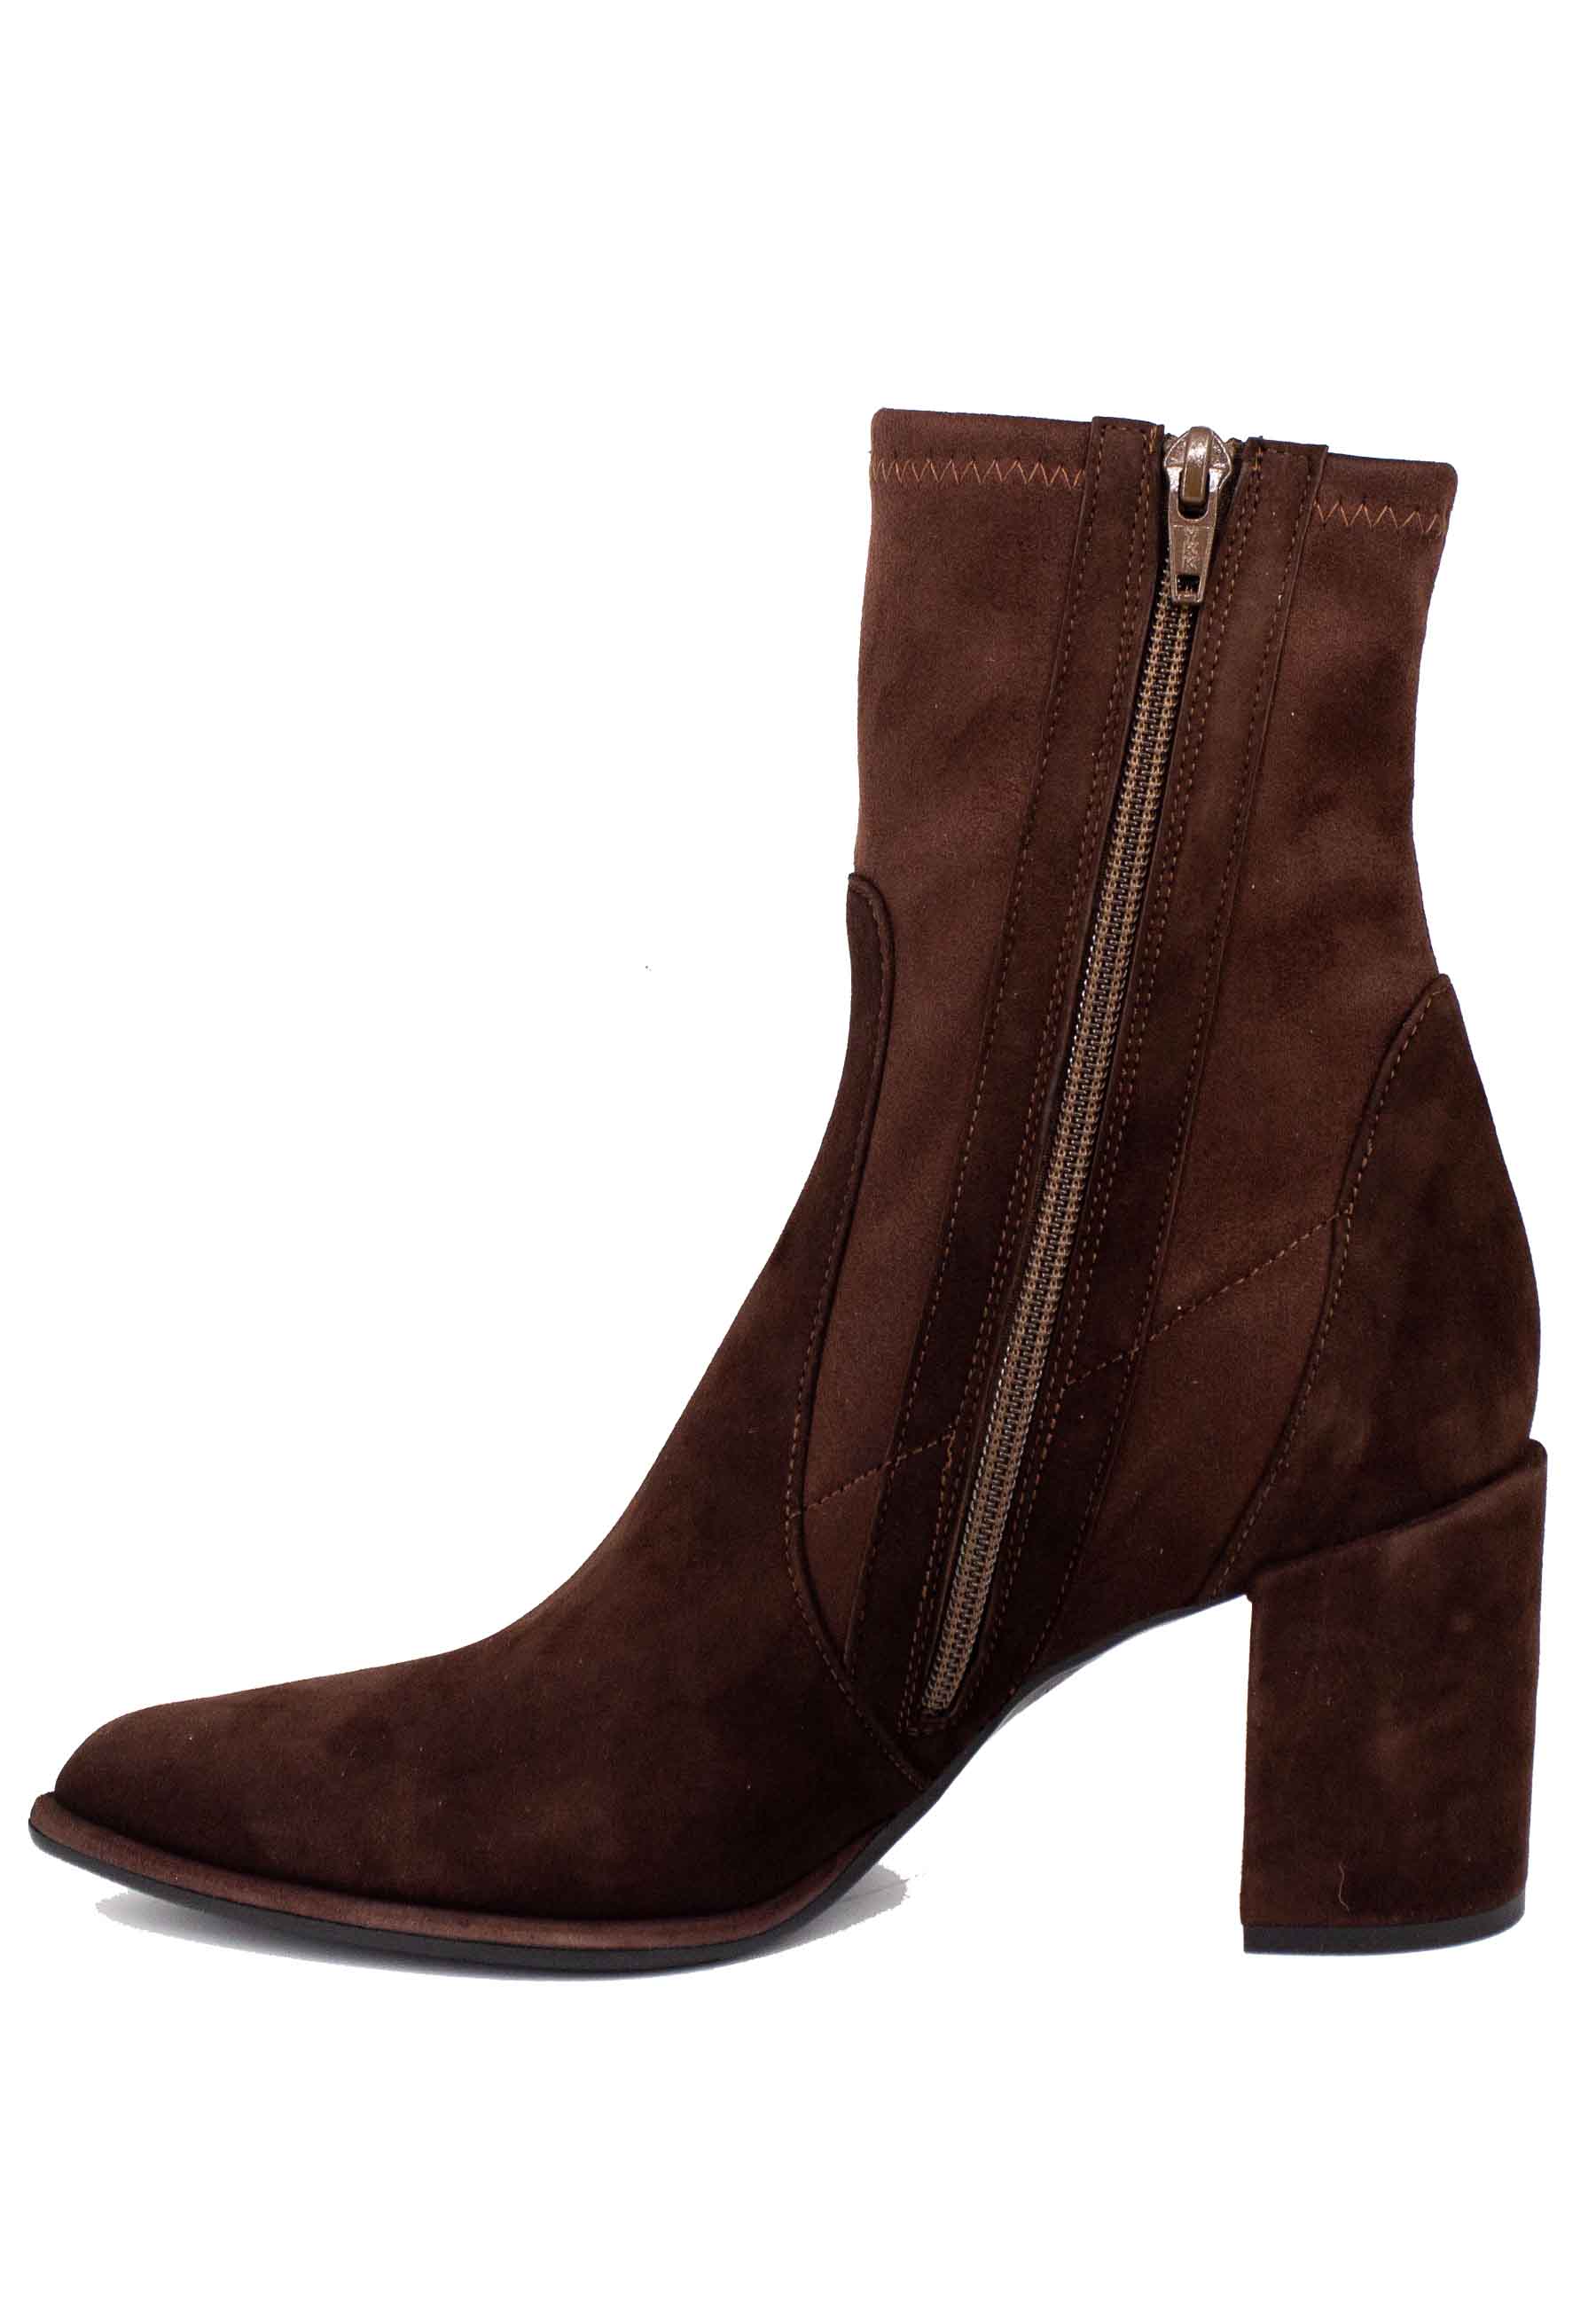 Women's brown suede pointed toe high heel ankle boots